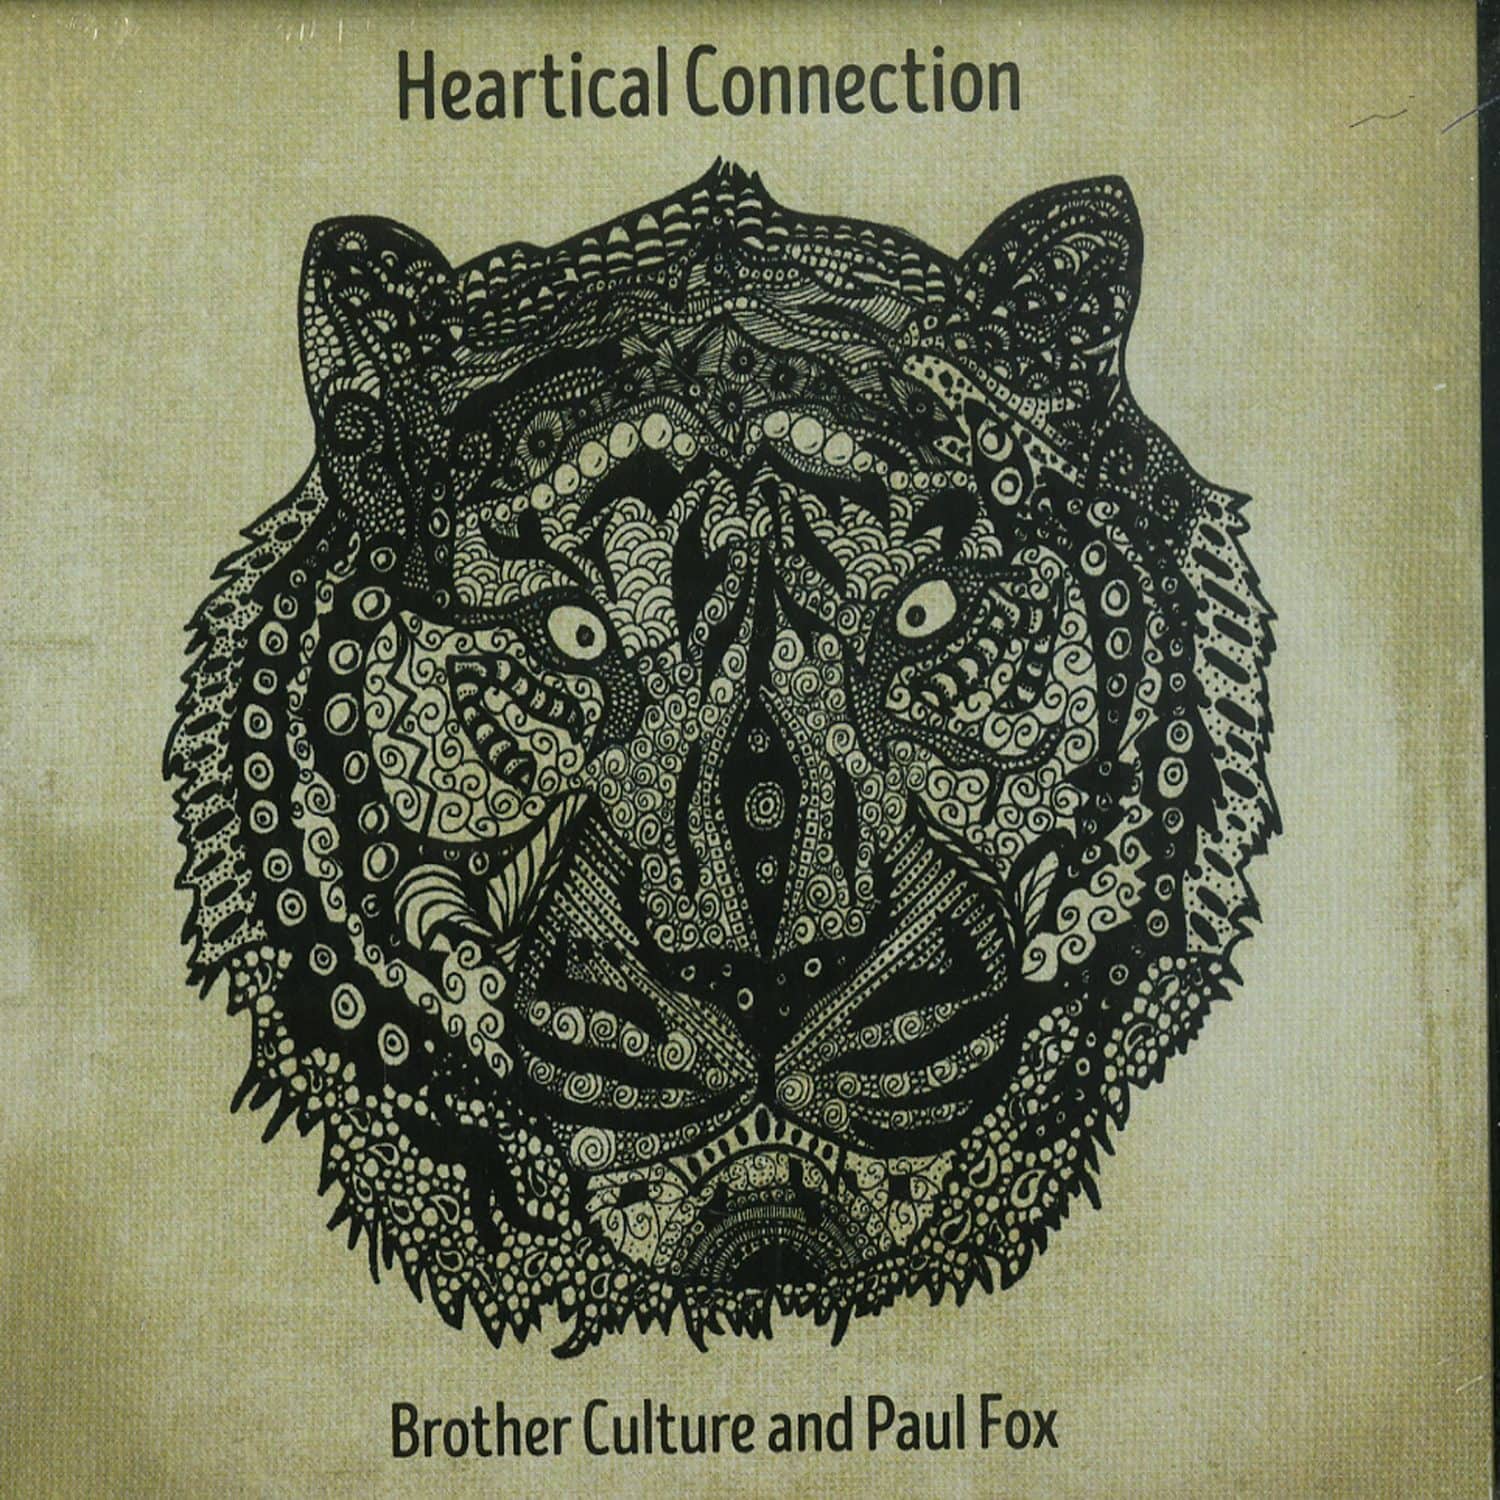 Brother Culture and Paul Fox - Heartical Connection 